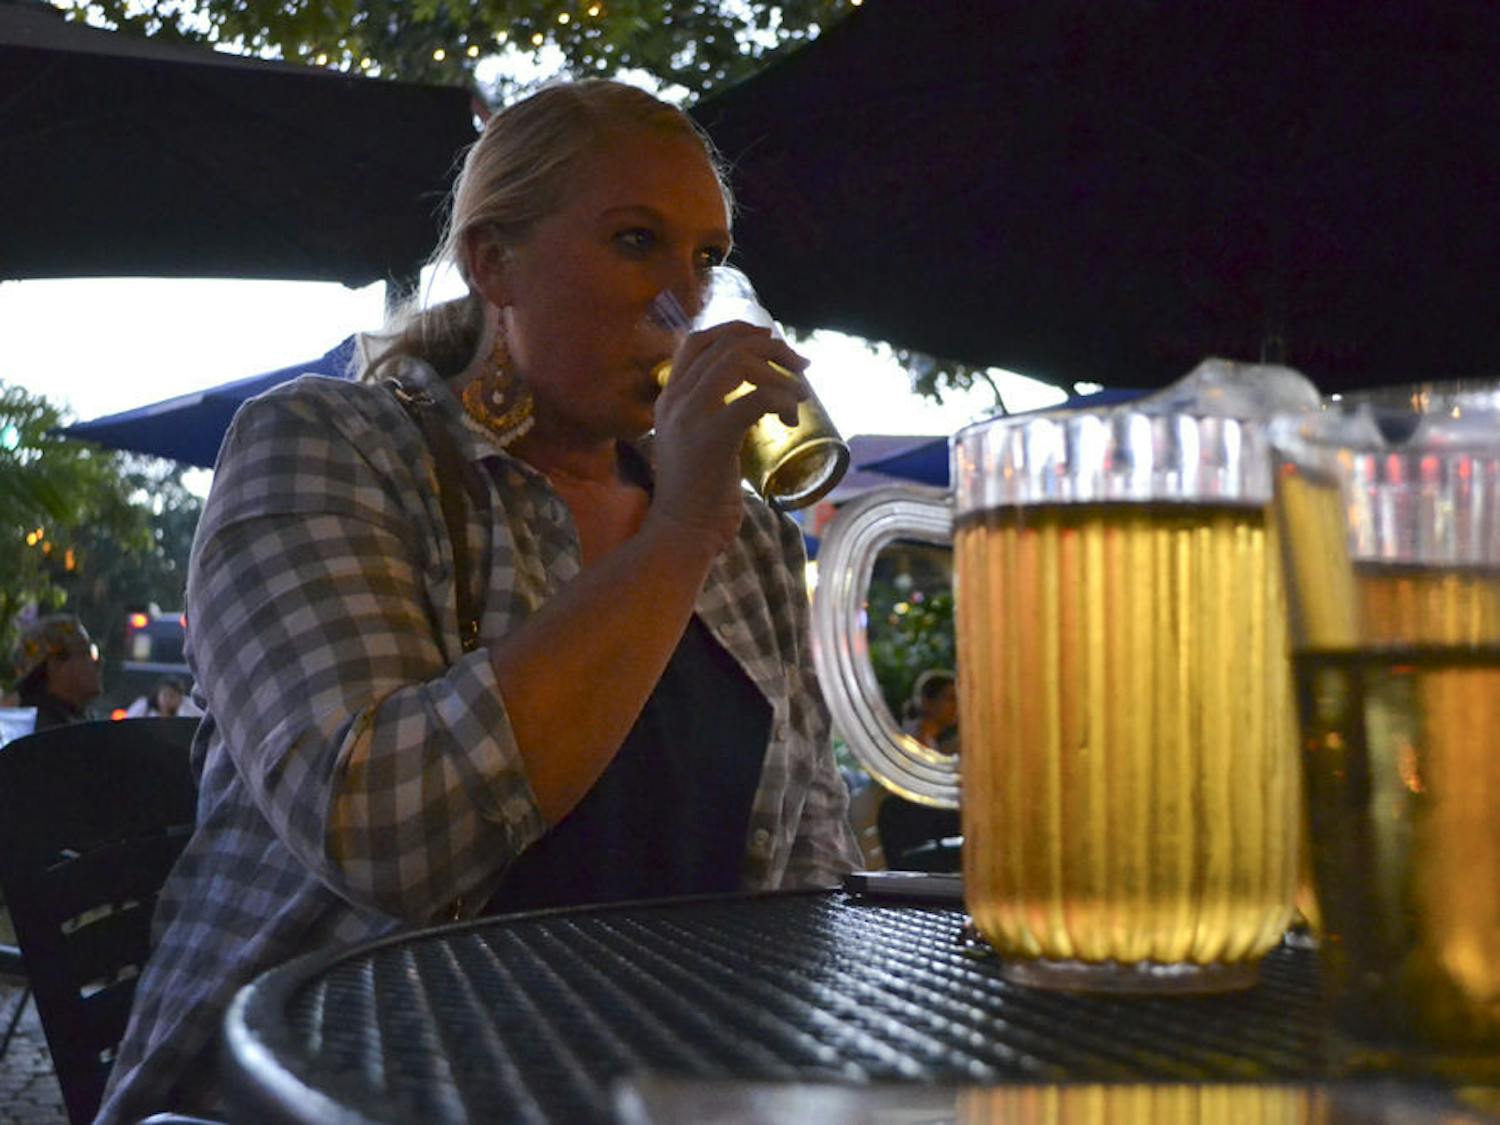 Mary Myers, a 22-year-old UF family, youth and community sciences senior, sips from her beer at The Swamp Restaurant on Oct. 13, 2015. Myers said when game day rolls around she comes to the restaurant with her friends because it has a fun outside atmosphere.